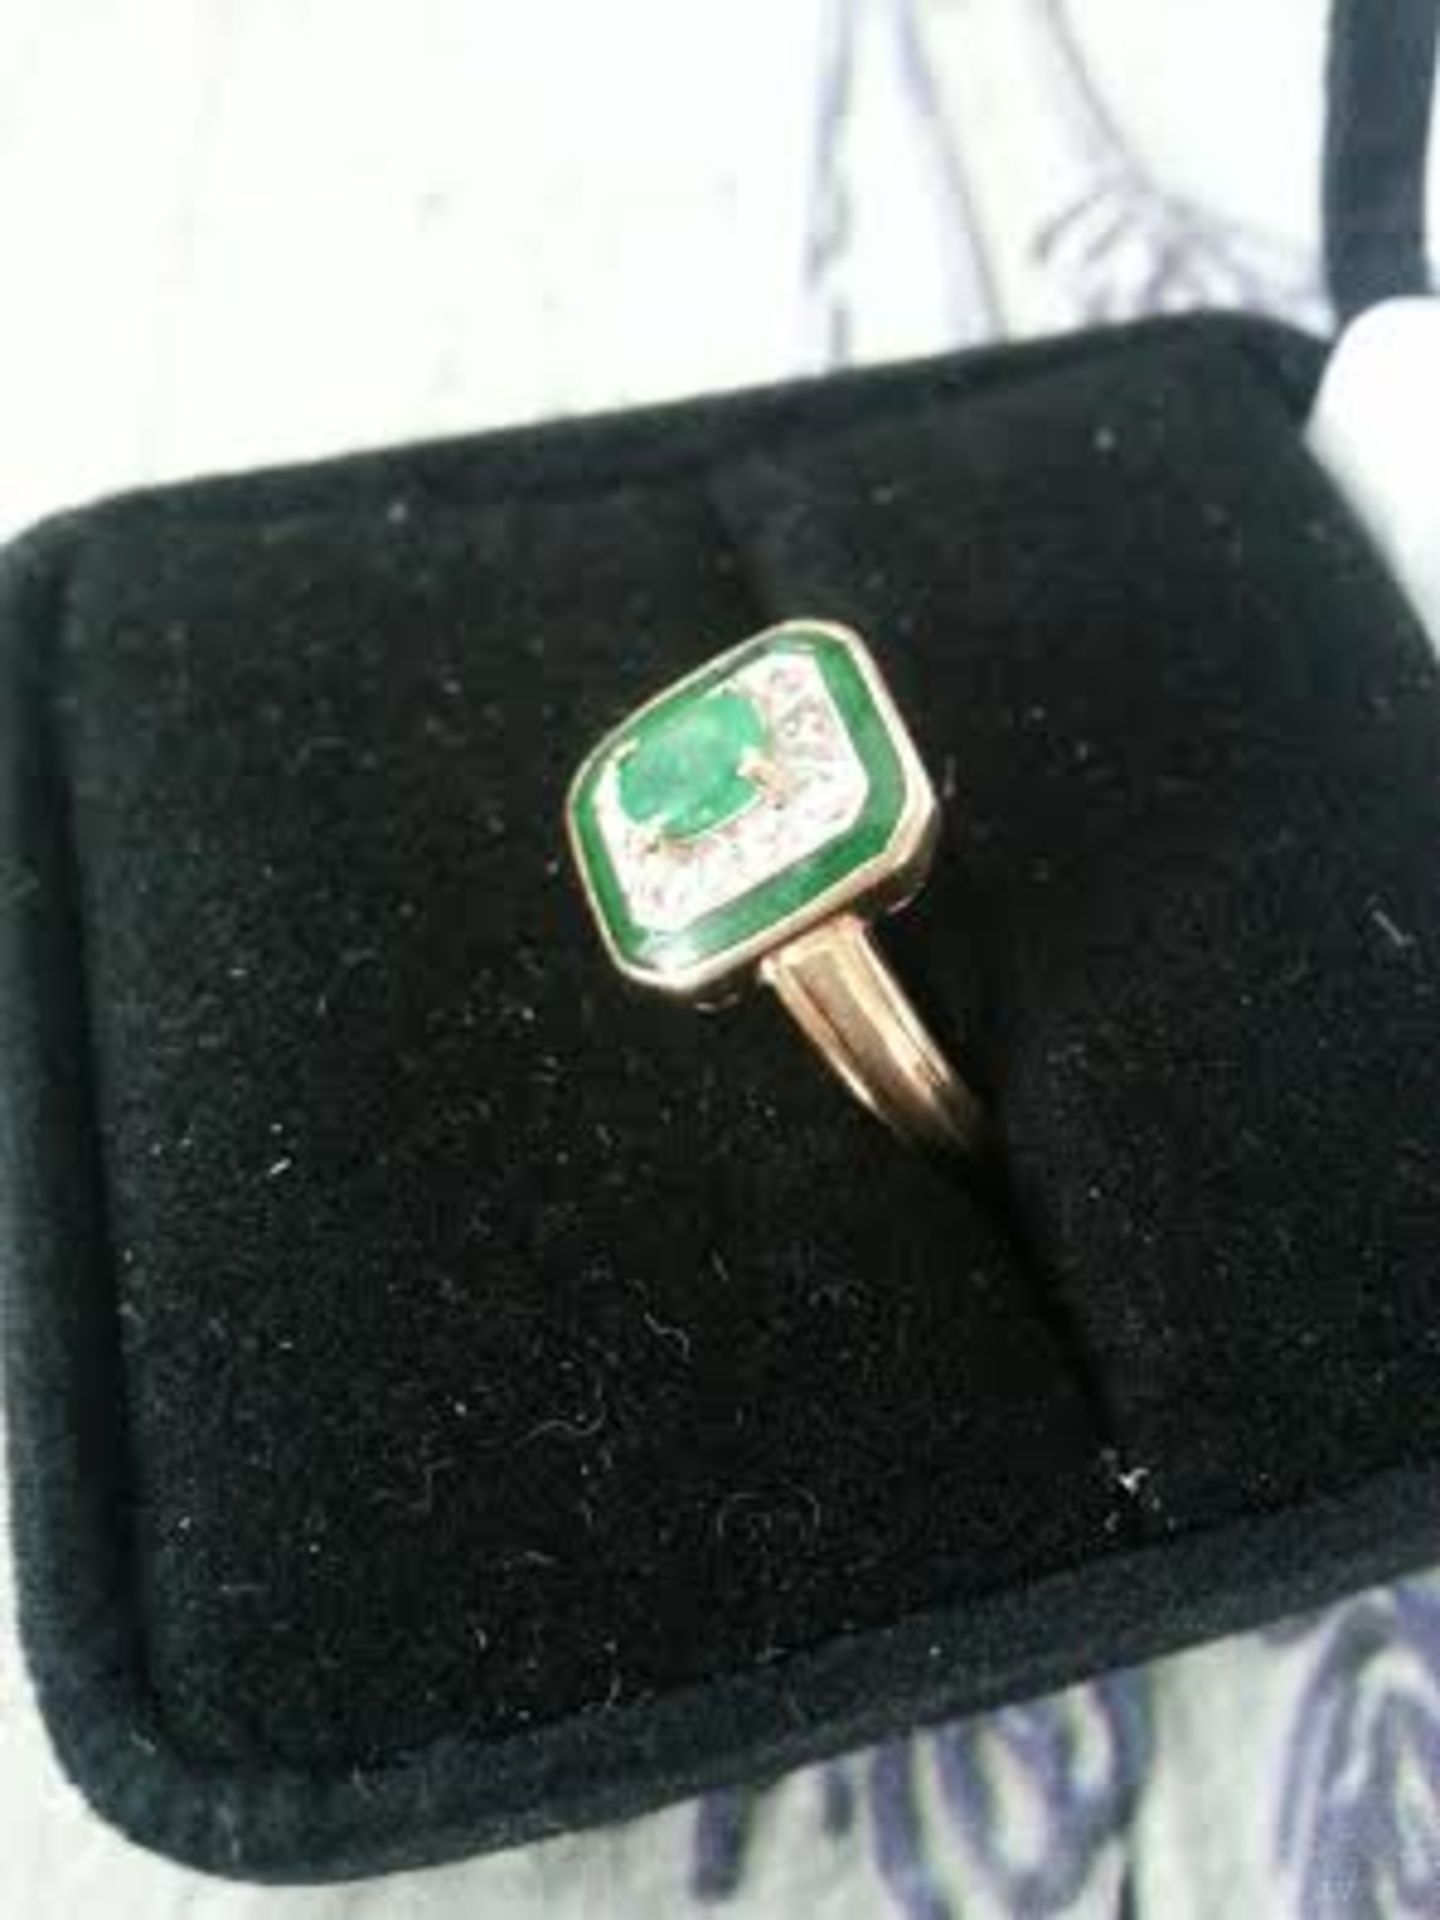 14 ct gold ring with brazilian emerald - Image 2 of 2